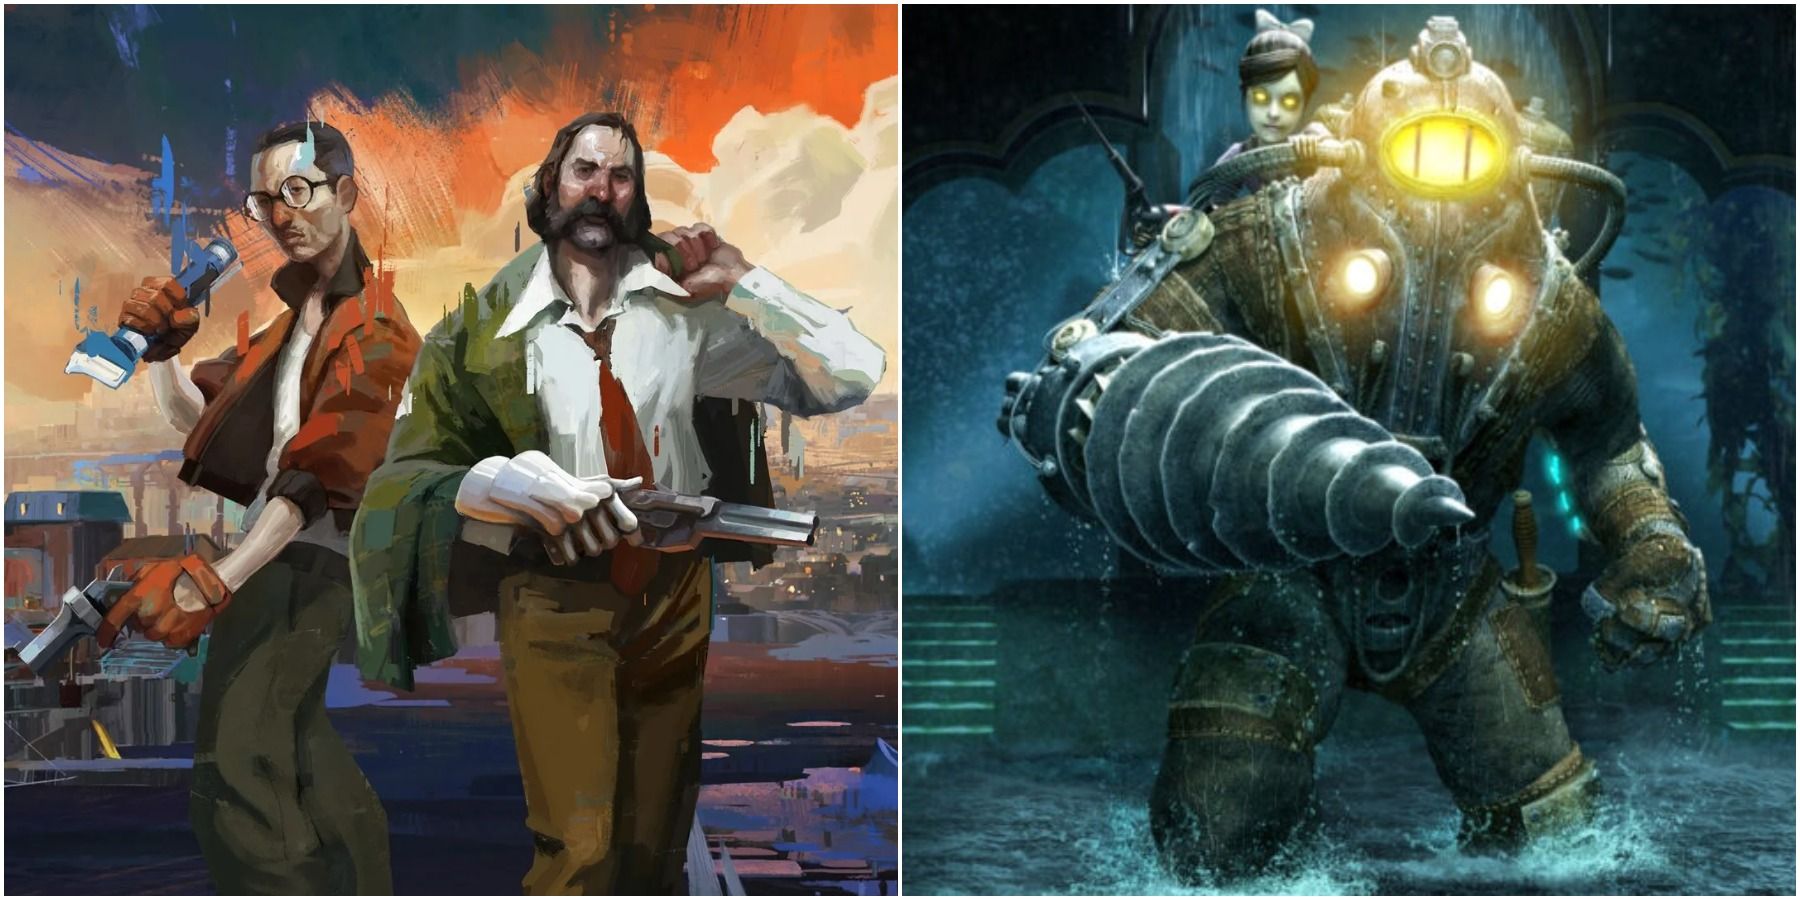 (Left) Disco Elysium key art with protagonists (Right) Bioshock 2 cover art with Big Daddy and Little Sister